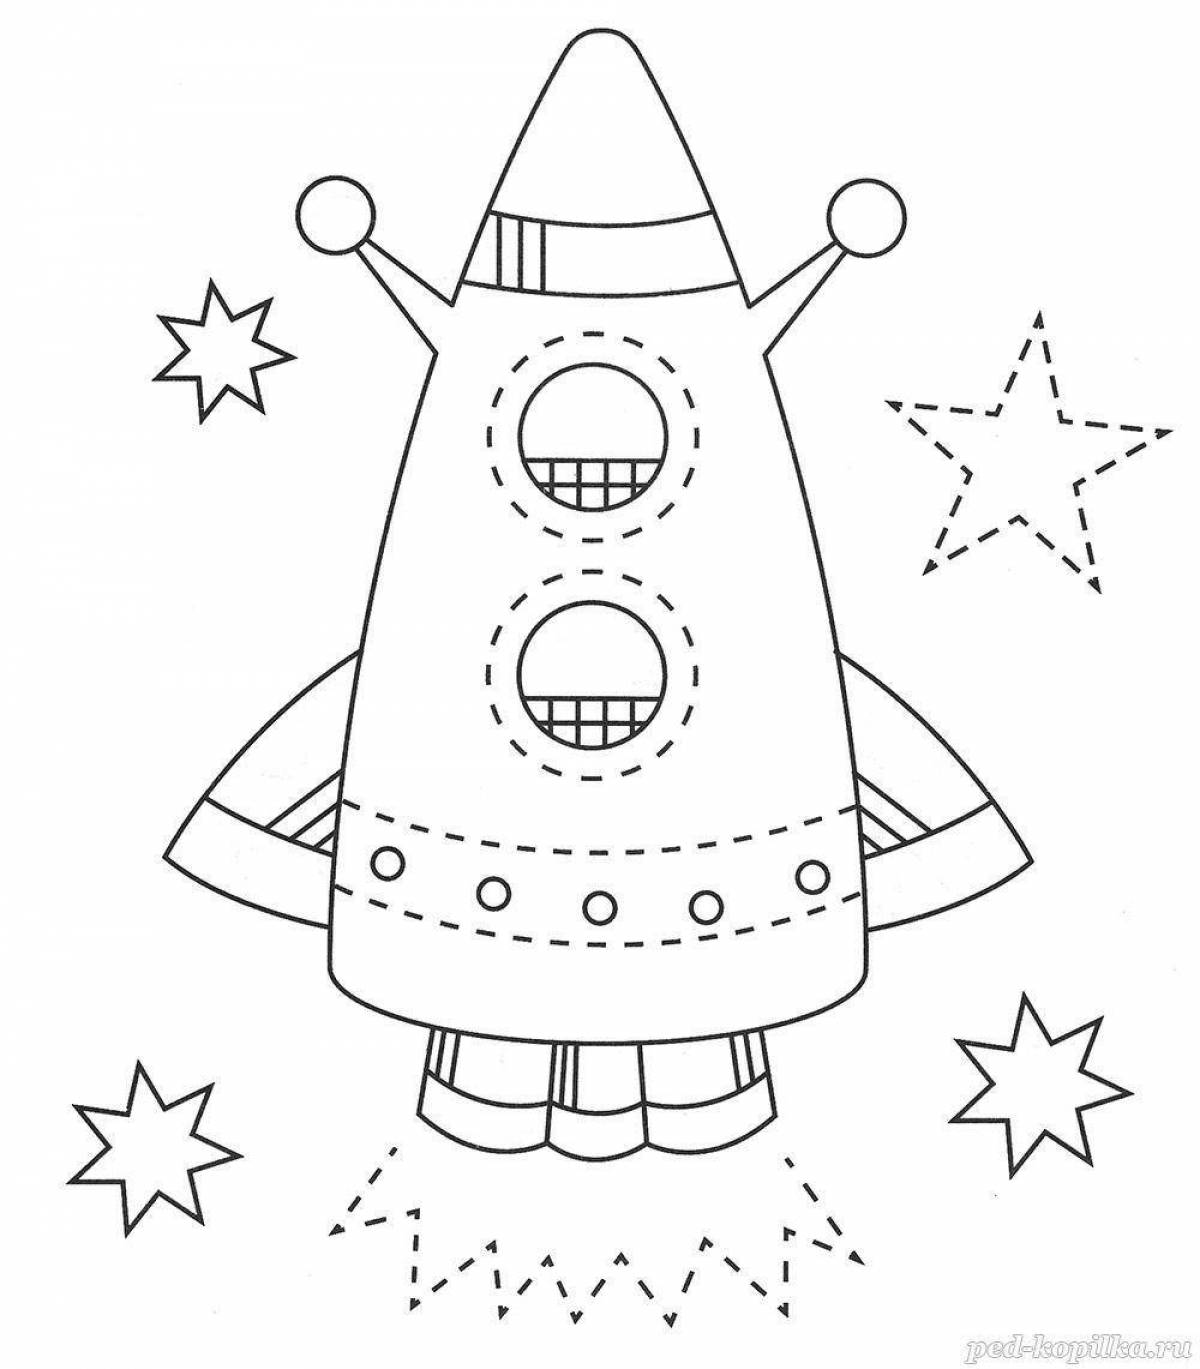 Lovely rocket coloring book for children 6-7 years old